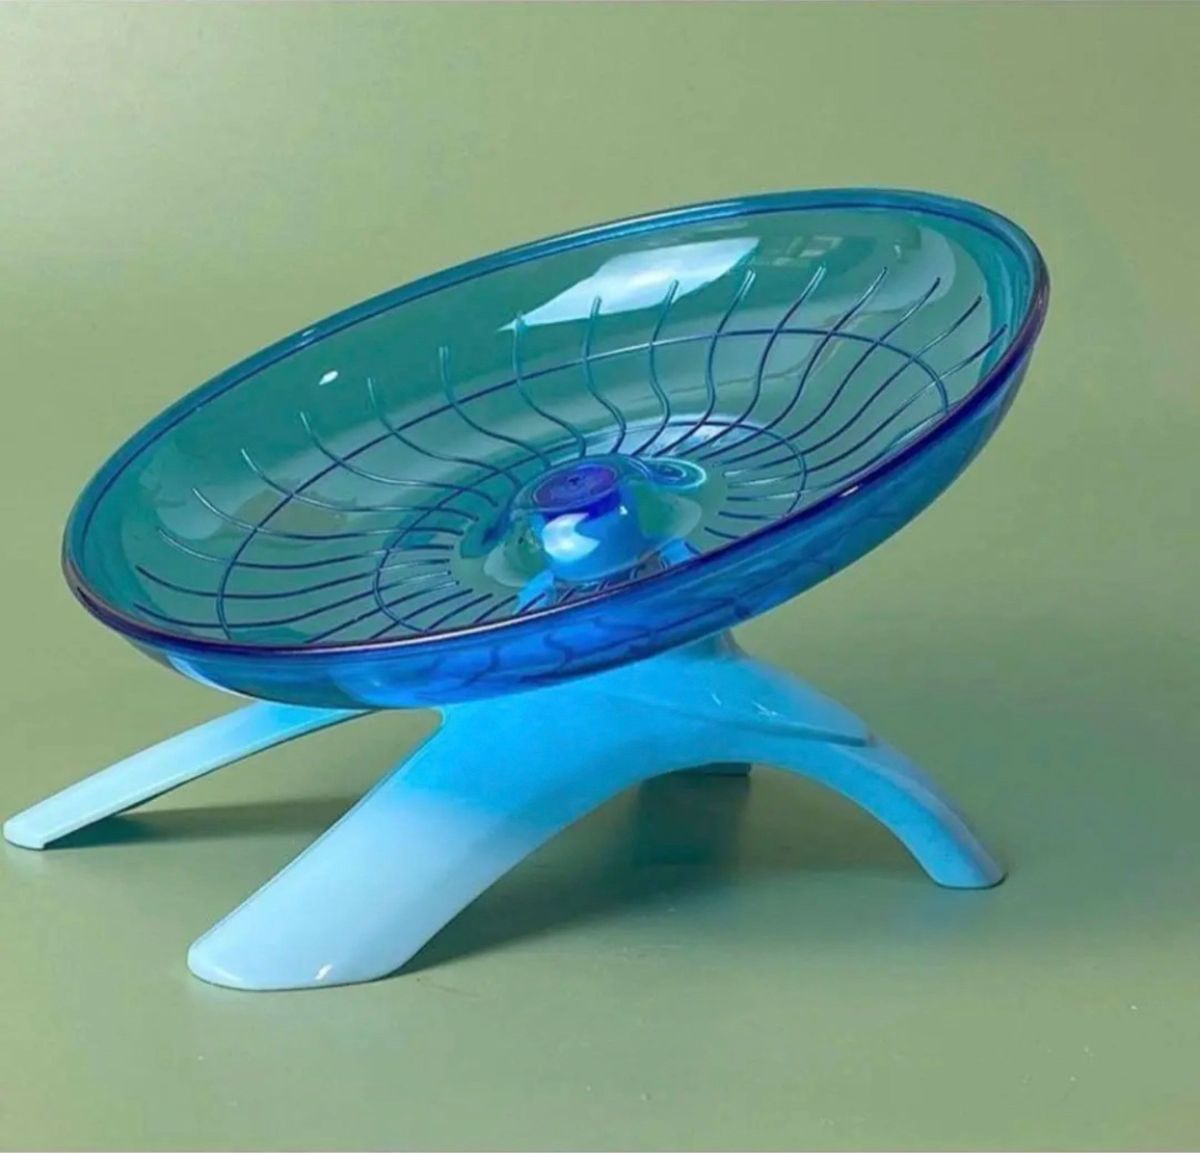  small animals hamster hamster wheel runs toy flying saucer pet quiet sound clear motion shortage cancellation -stroke less cancellation pet accessories blue 